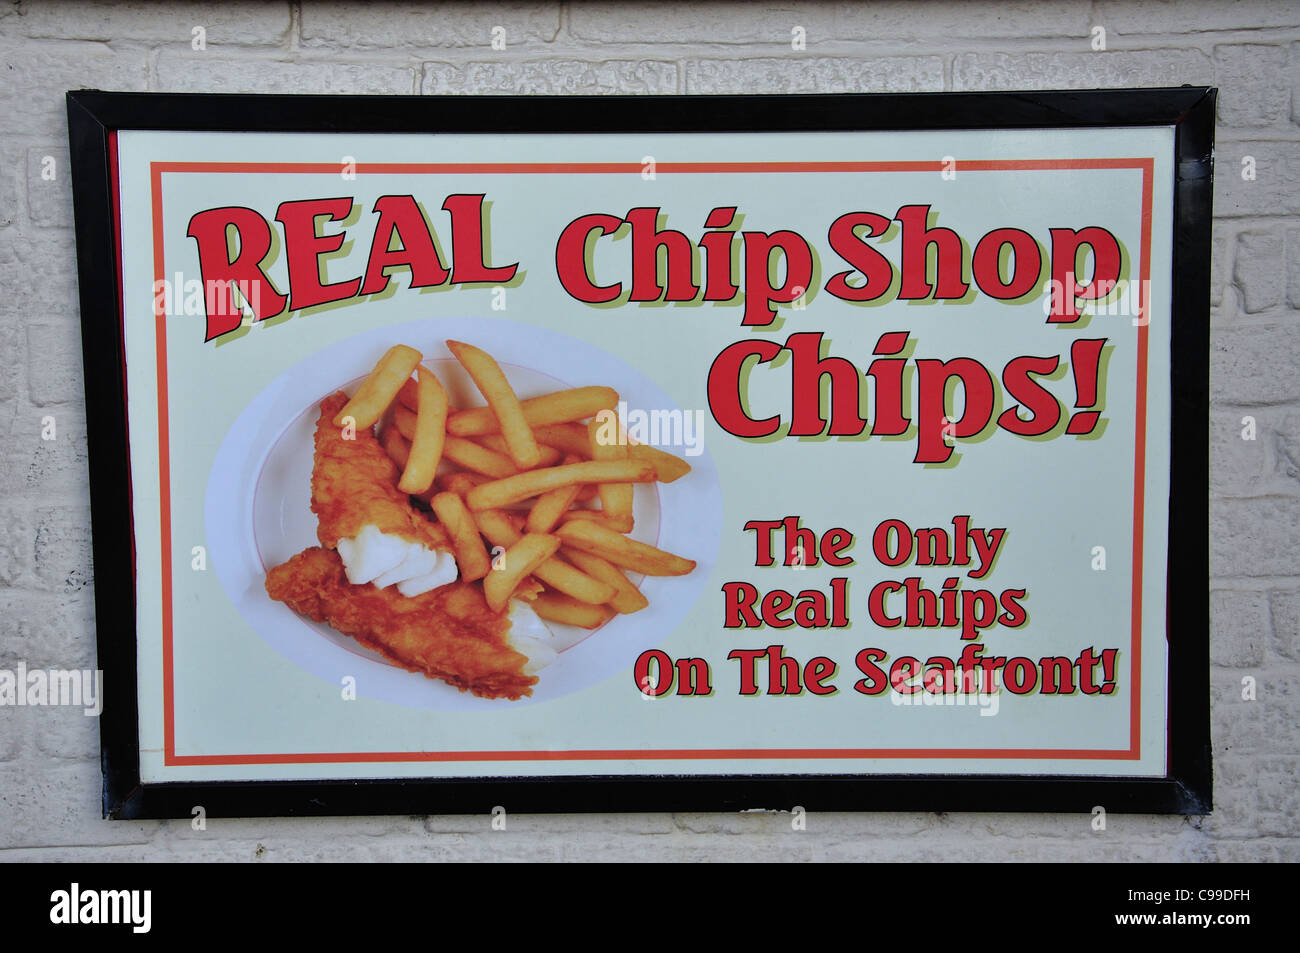 Chip shop chips sign outside promenade cafe, Southsea, Portsmouth, Hampshire, England, United Kingdom Stock Photo